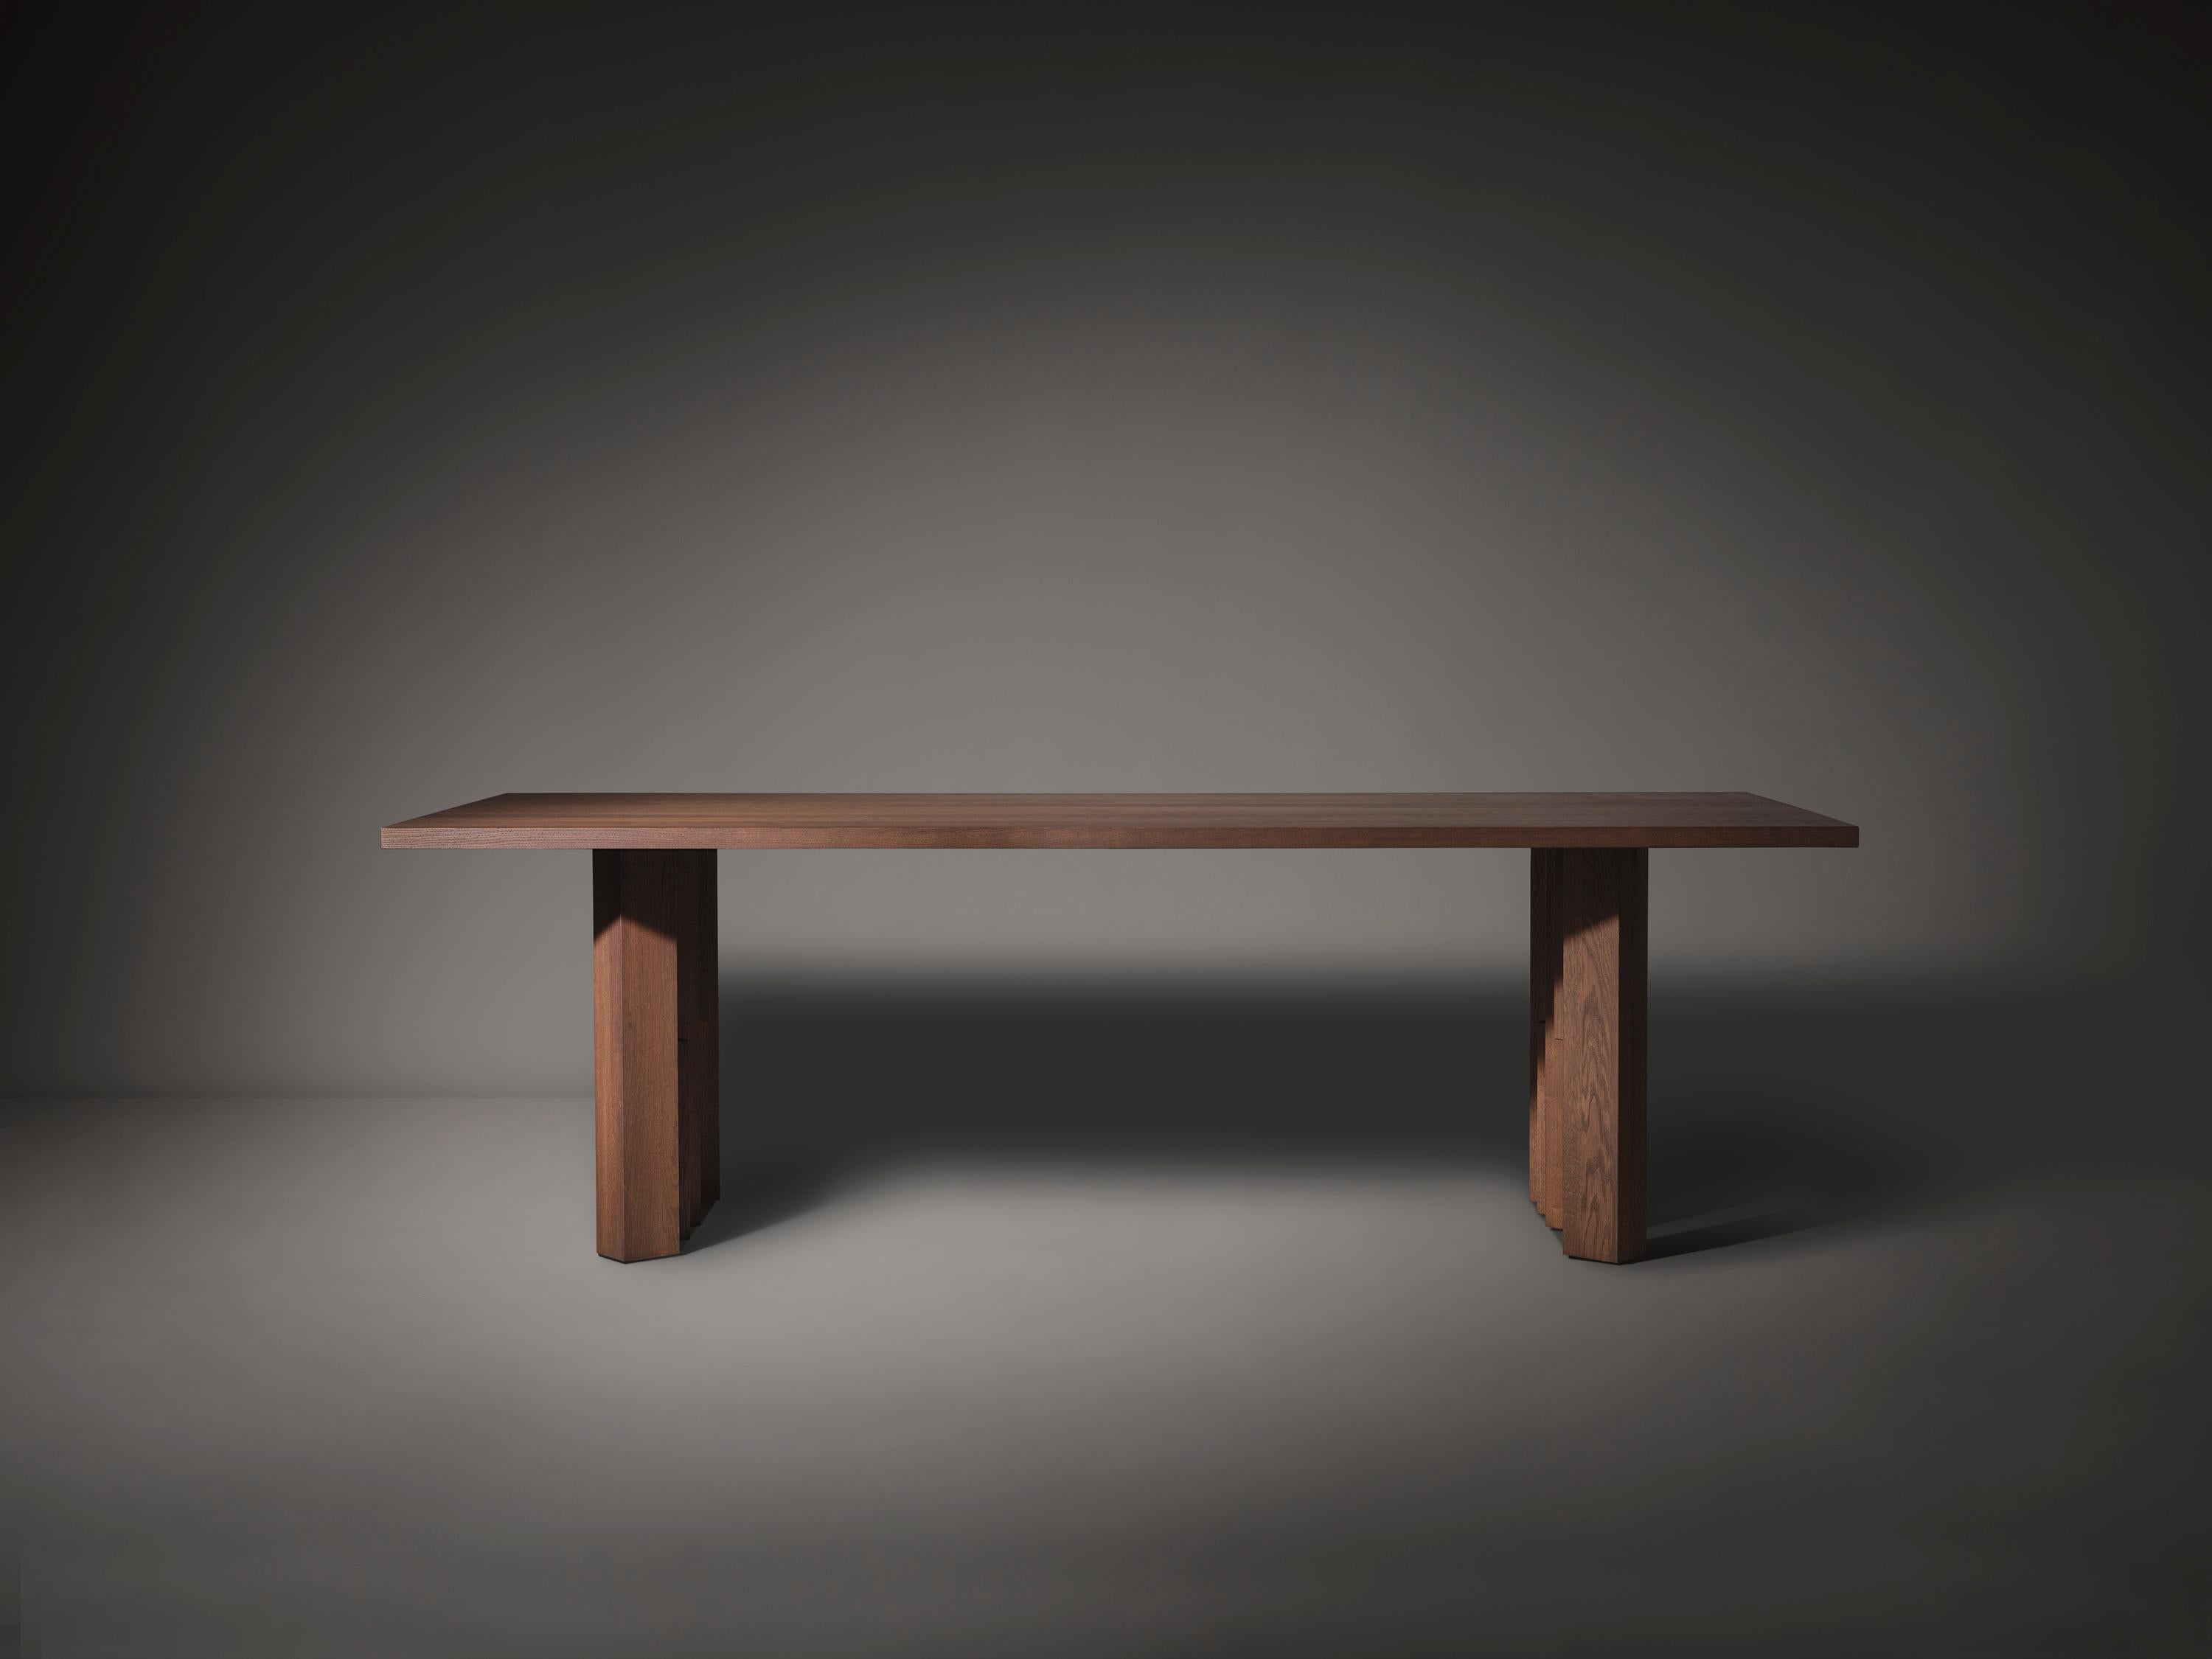 The Amsterdam School style inspired Fenestra table is crafted out of solid hardwood. The design is inspired by Brick Expressionism, the architectural movement visible in Amsterdam’s ‘South Plan’ area - the city development plan designed by H.P.